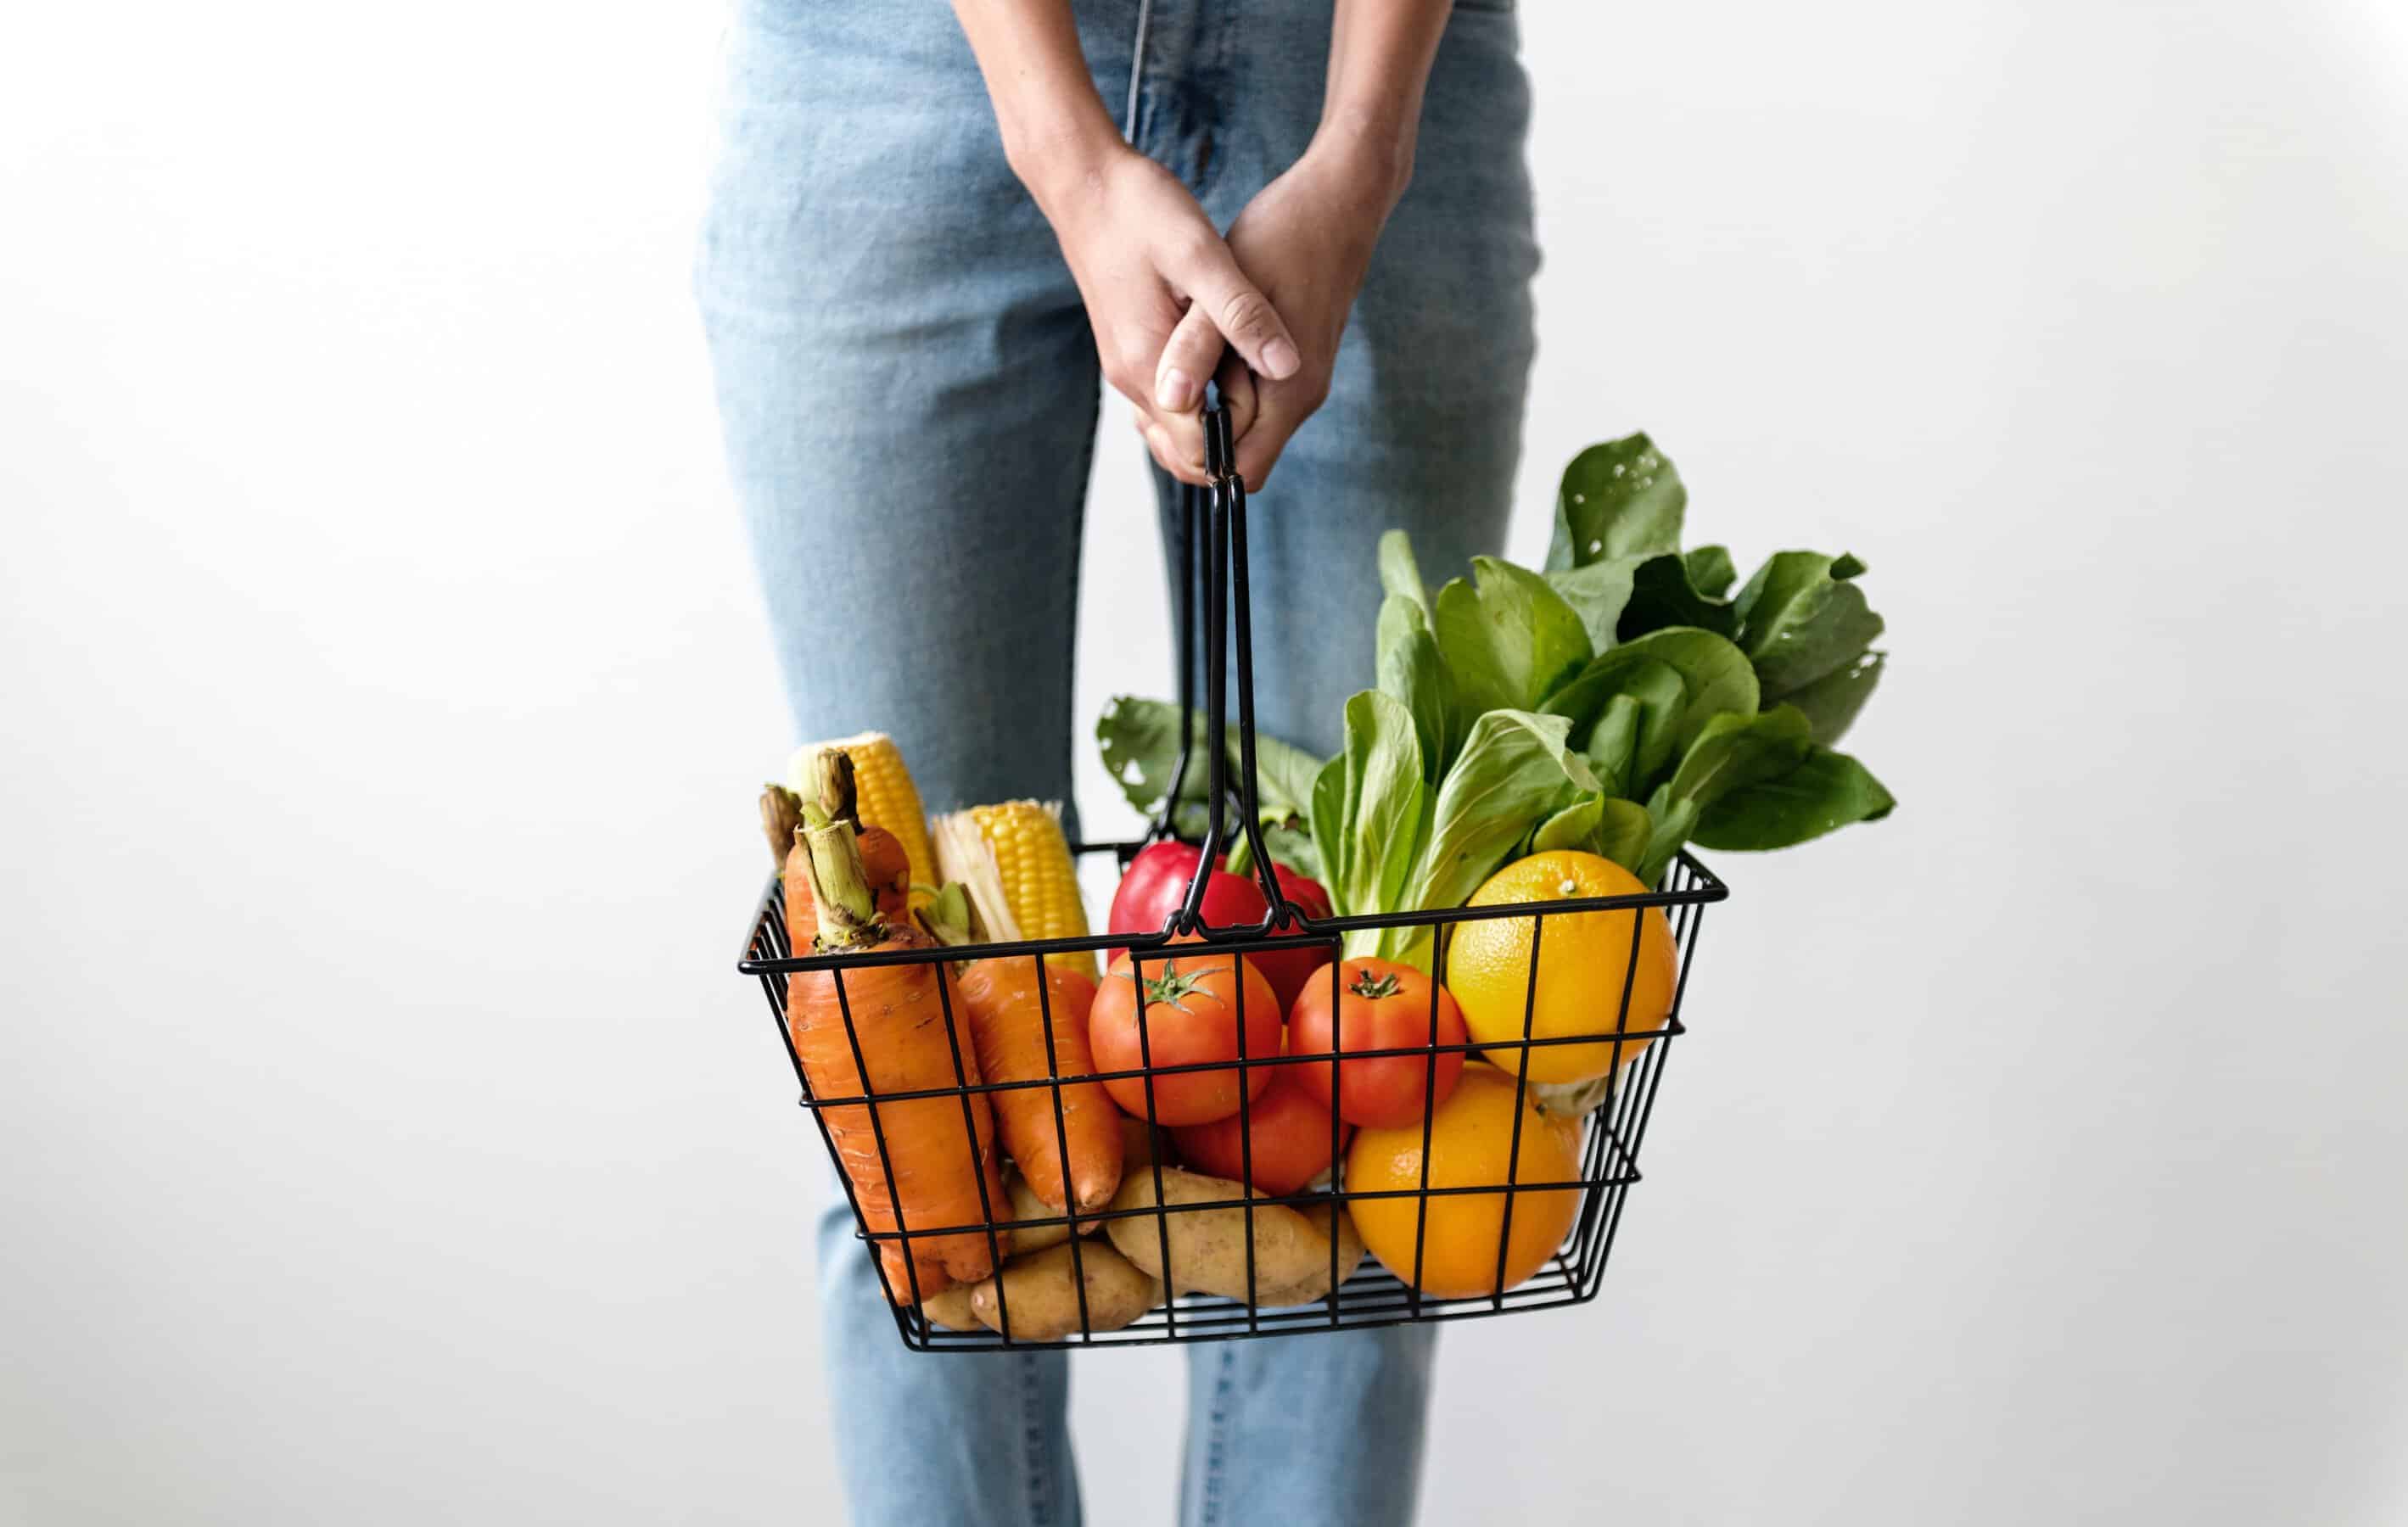 merqueo gets us$14 million in series a investment round to revolutionize grocery shopping